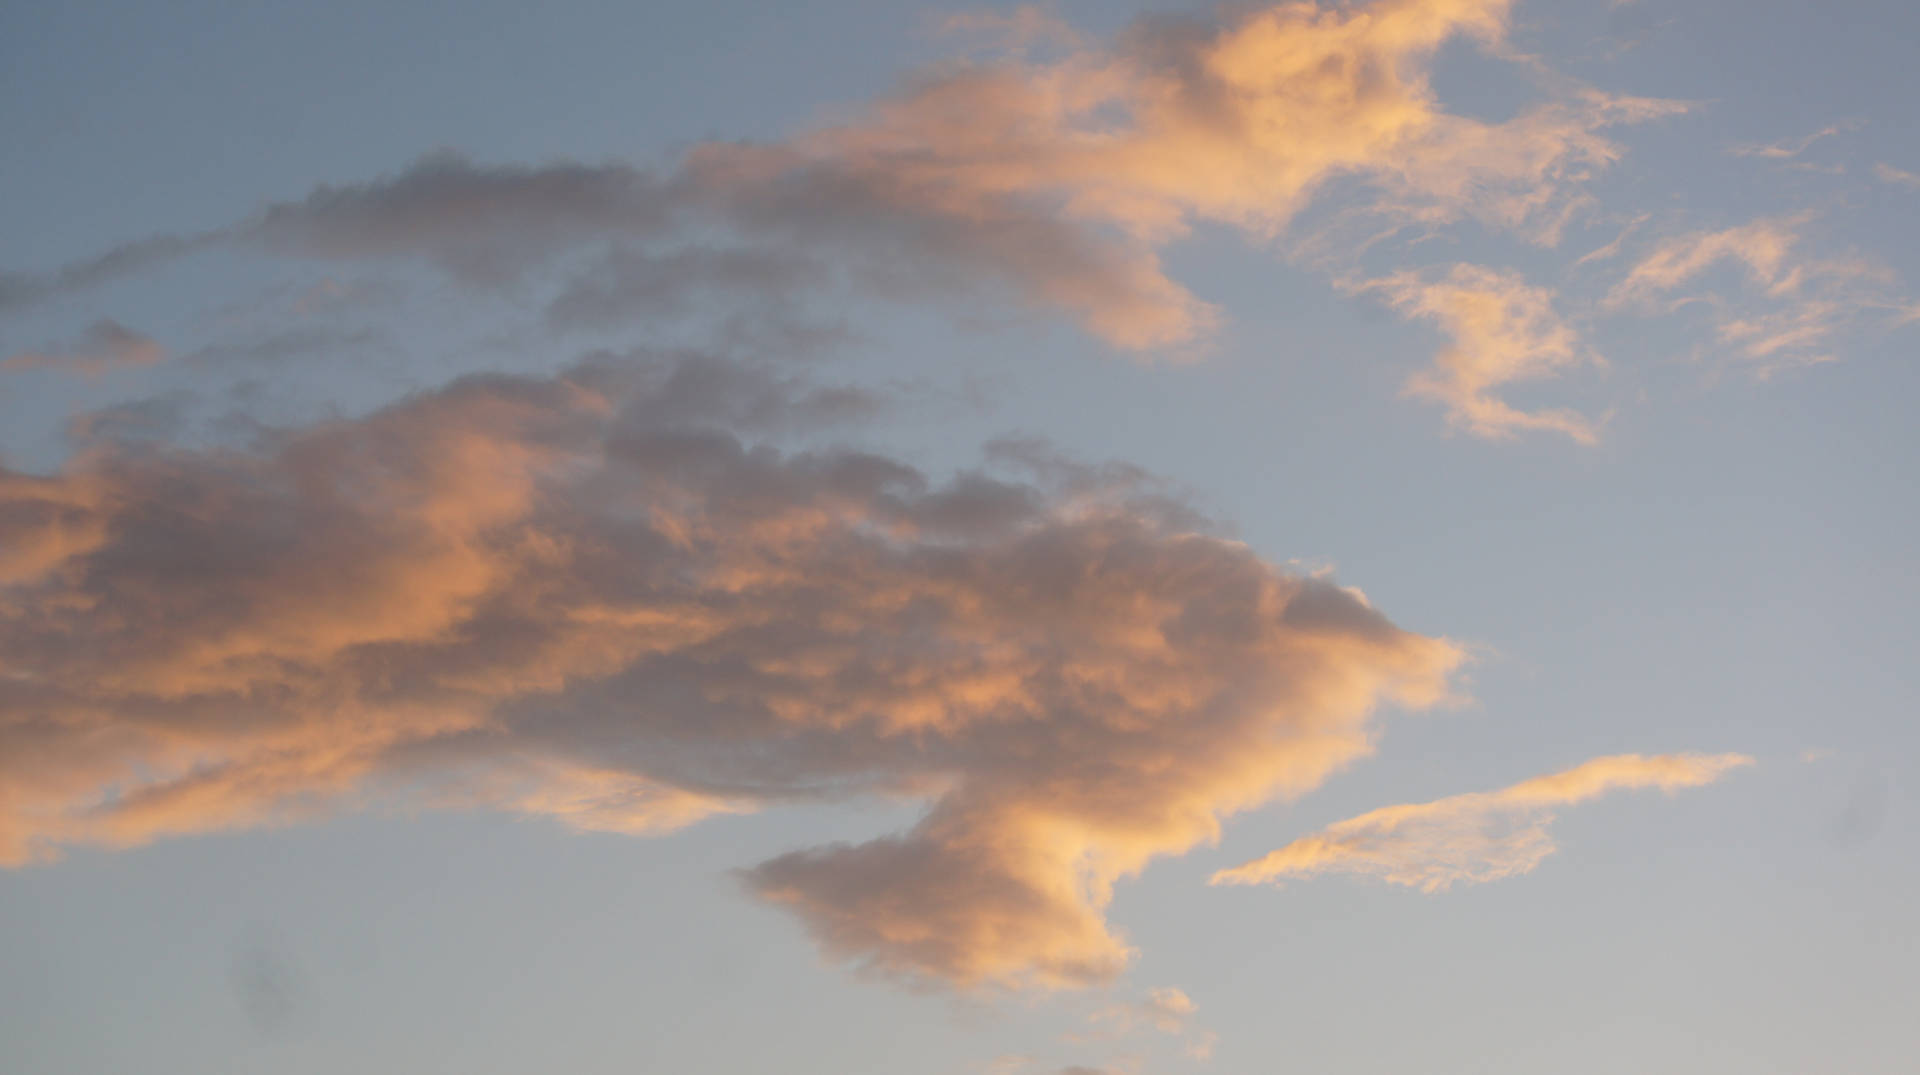 Aesthetic wallpaper of orange and white clouds during dusk. 